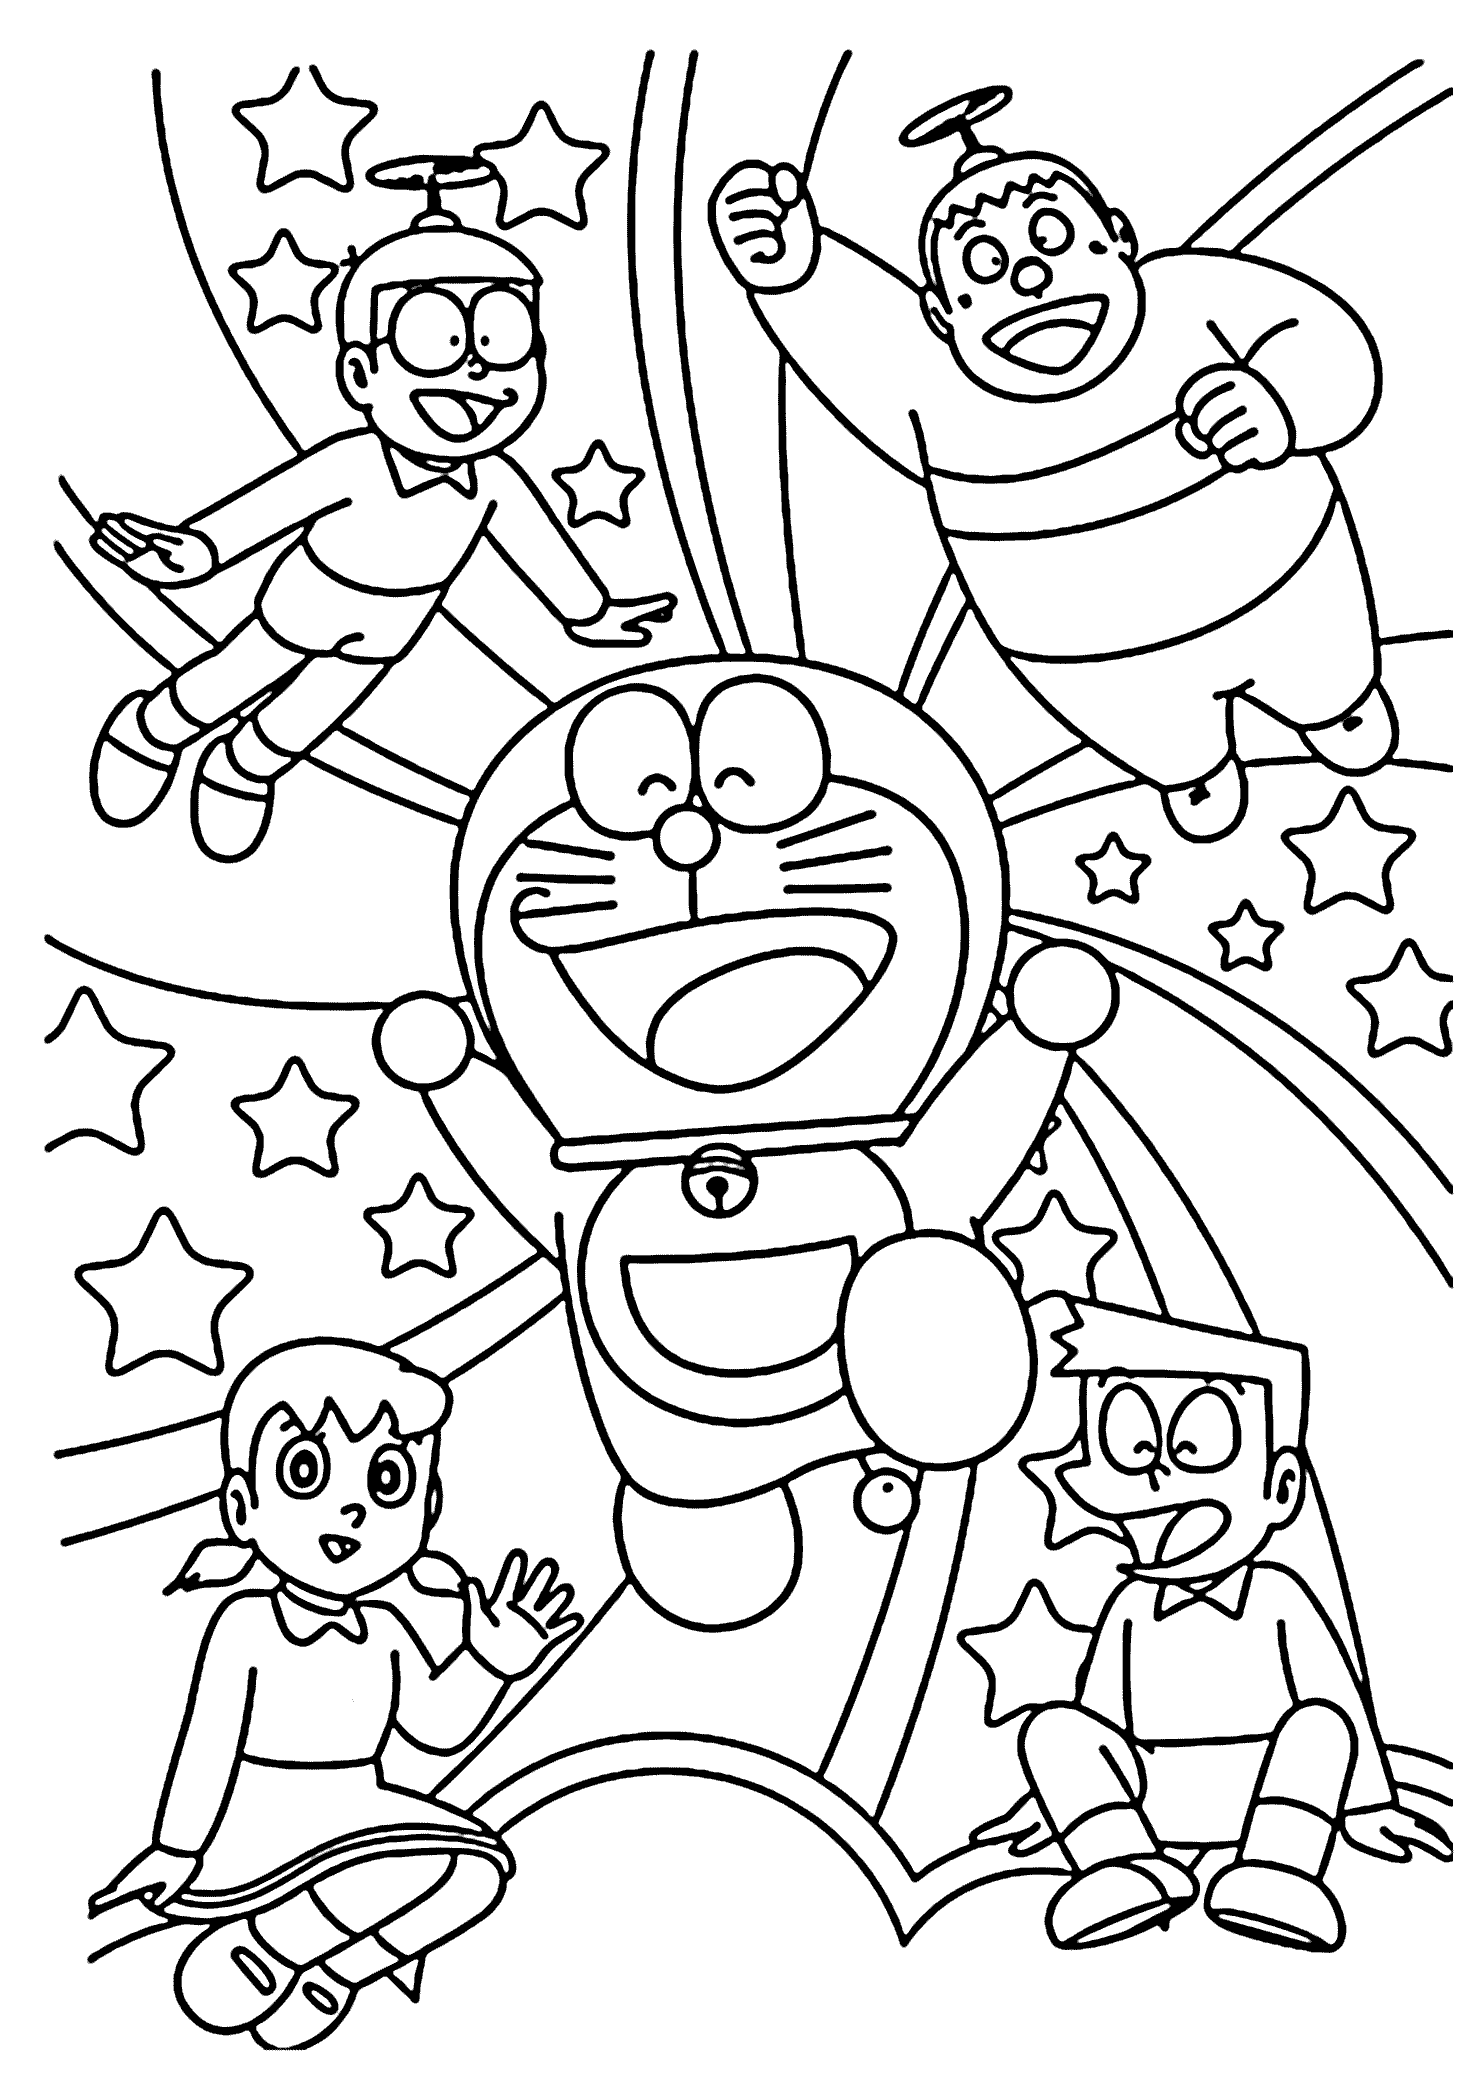 Doraemon And Friends Coloring Page